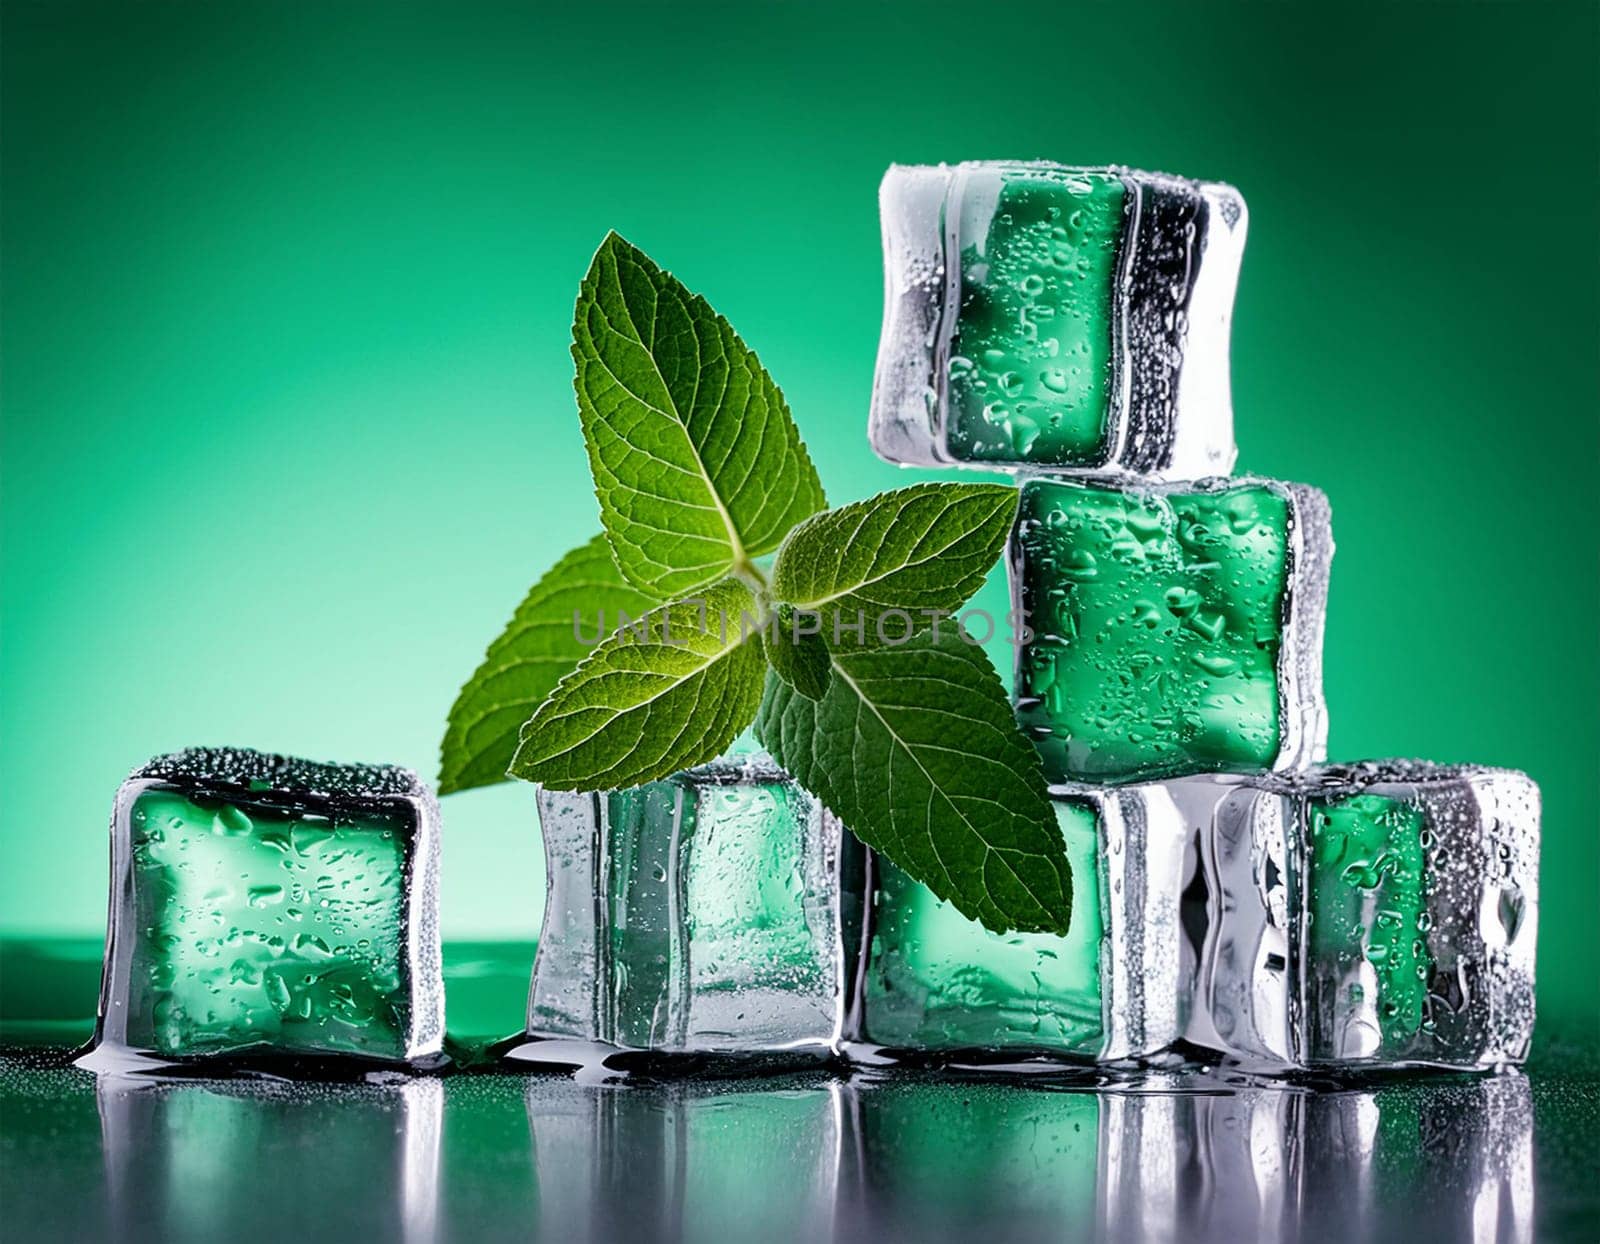 Clean water, ice crystal cubes with mint leaves and bubbles. Menthol, cool mint, peppermint, spearmint, mojito or lemonade drink wave splashes